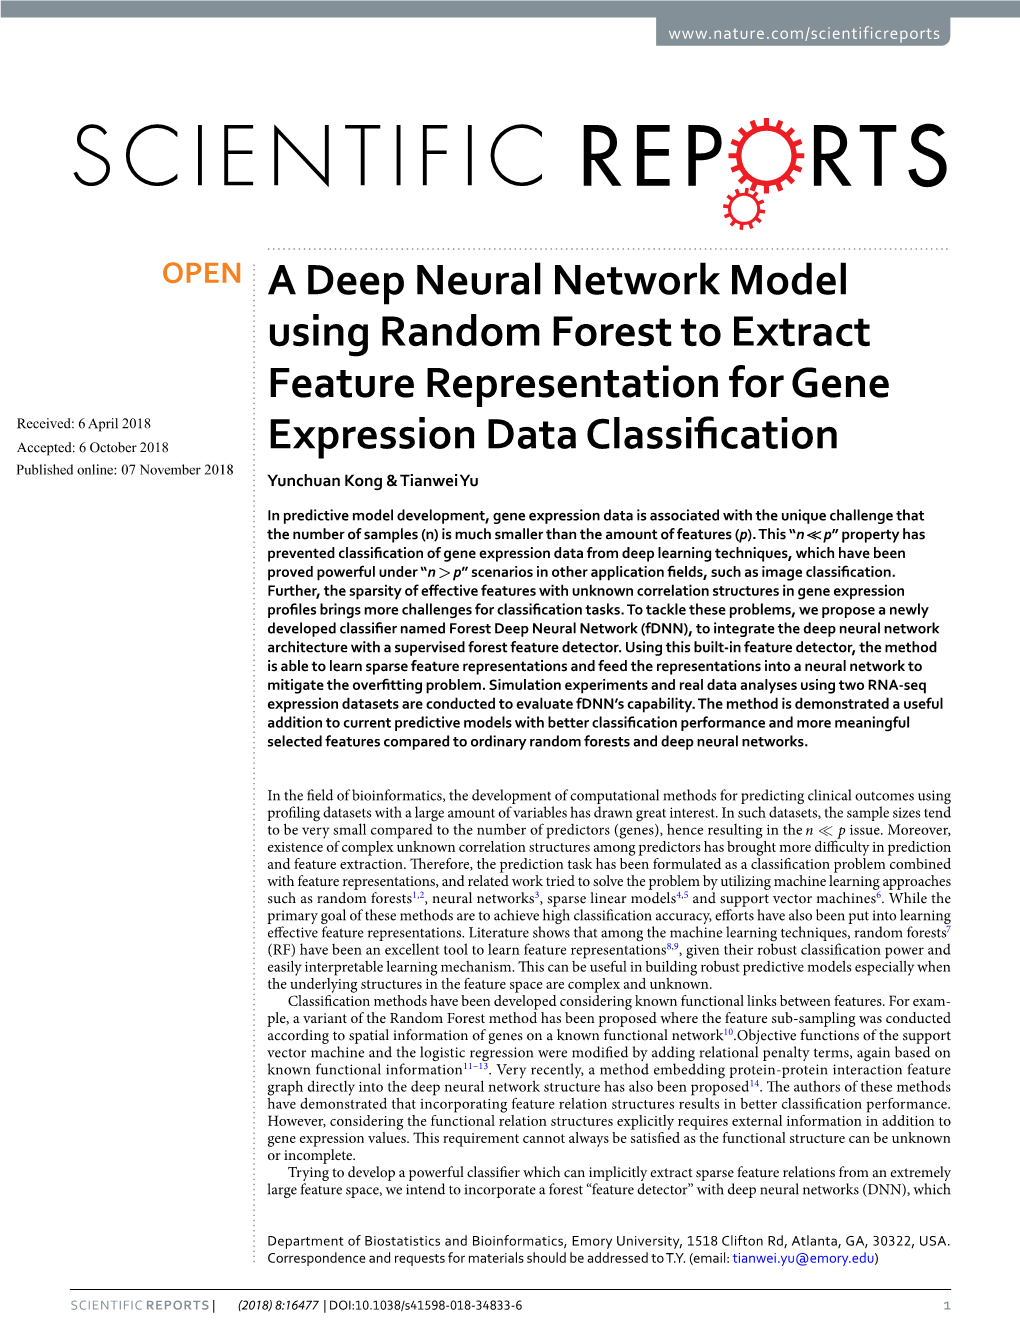 A Deep Neural Network Model Using Random Forest to Extract Feature